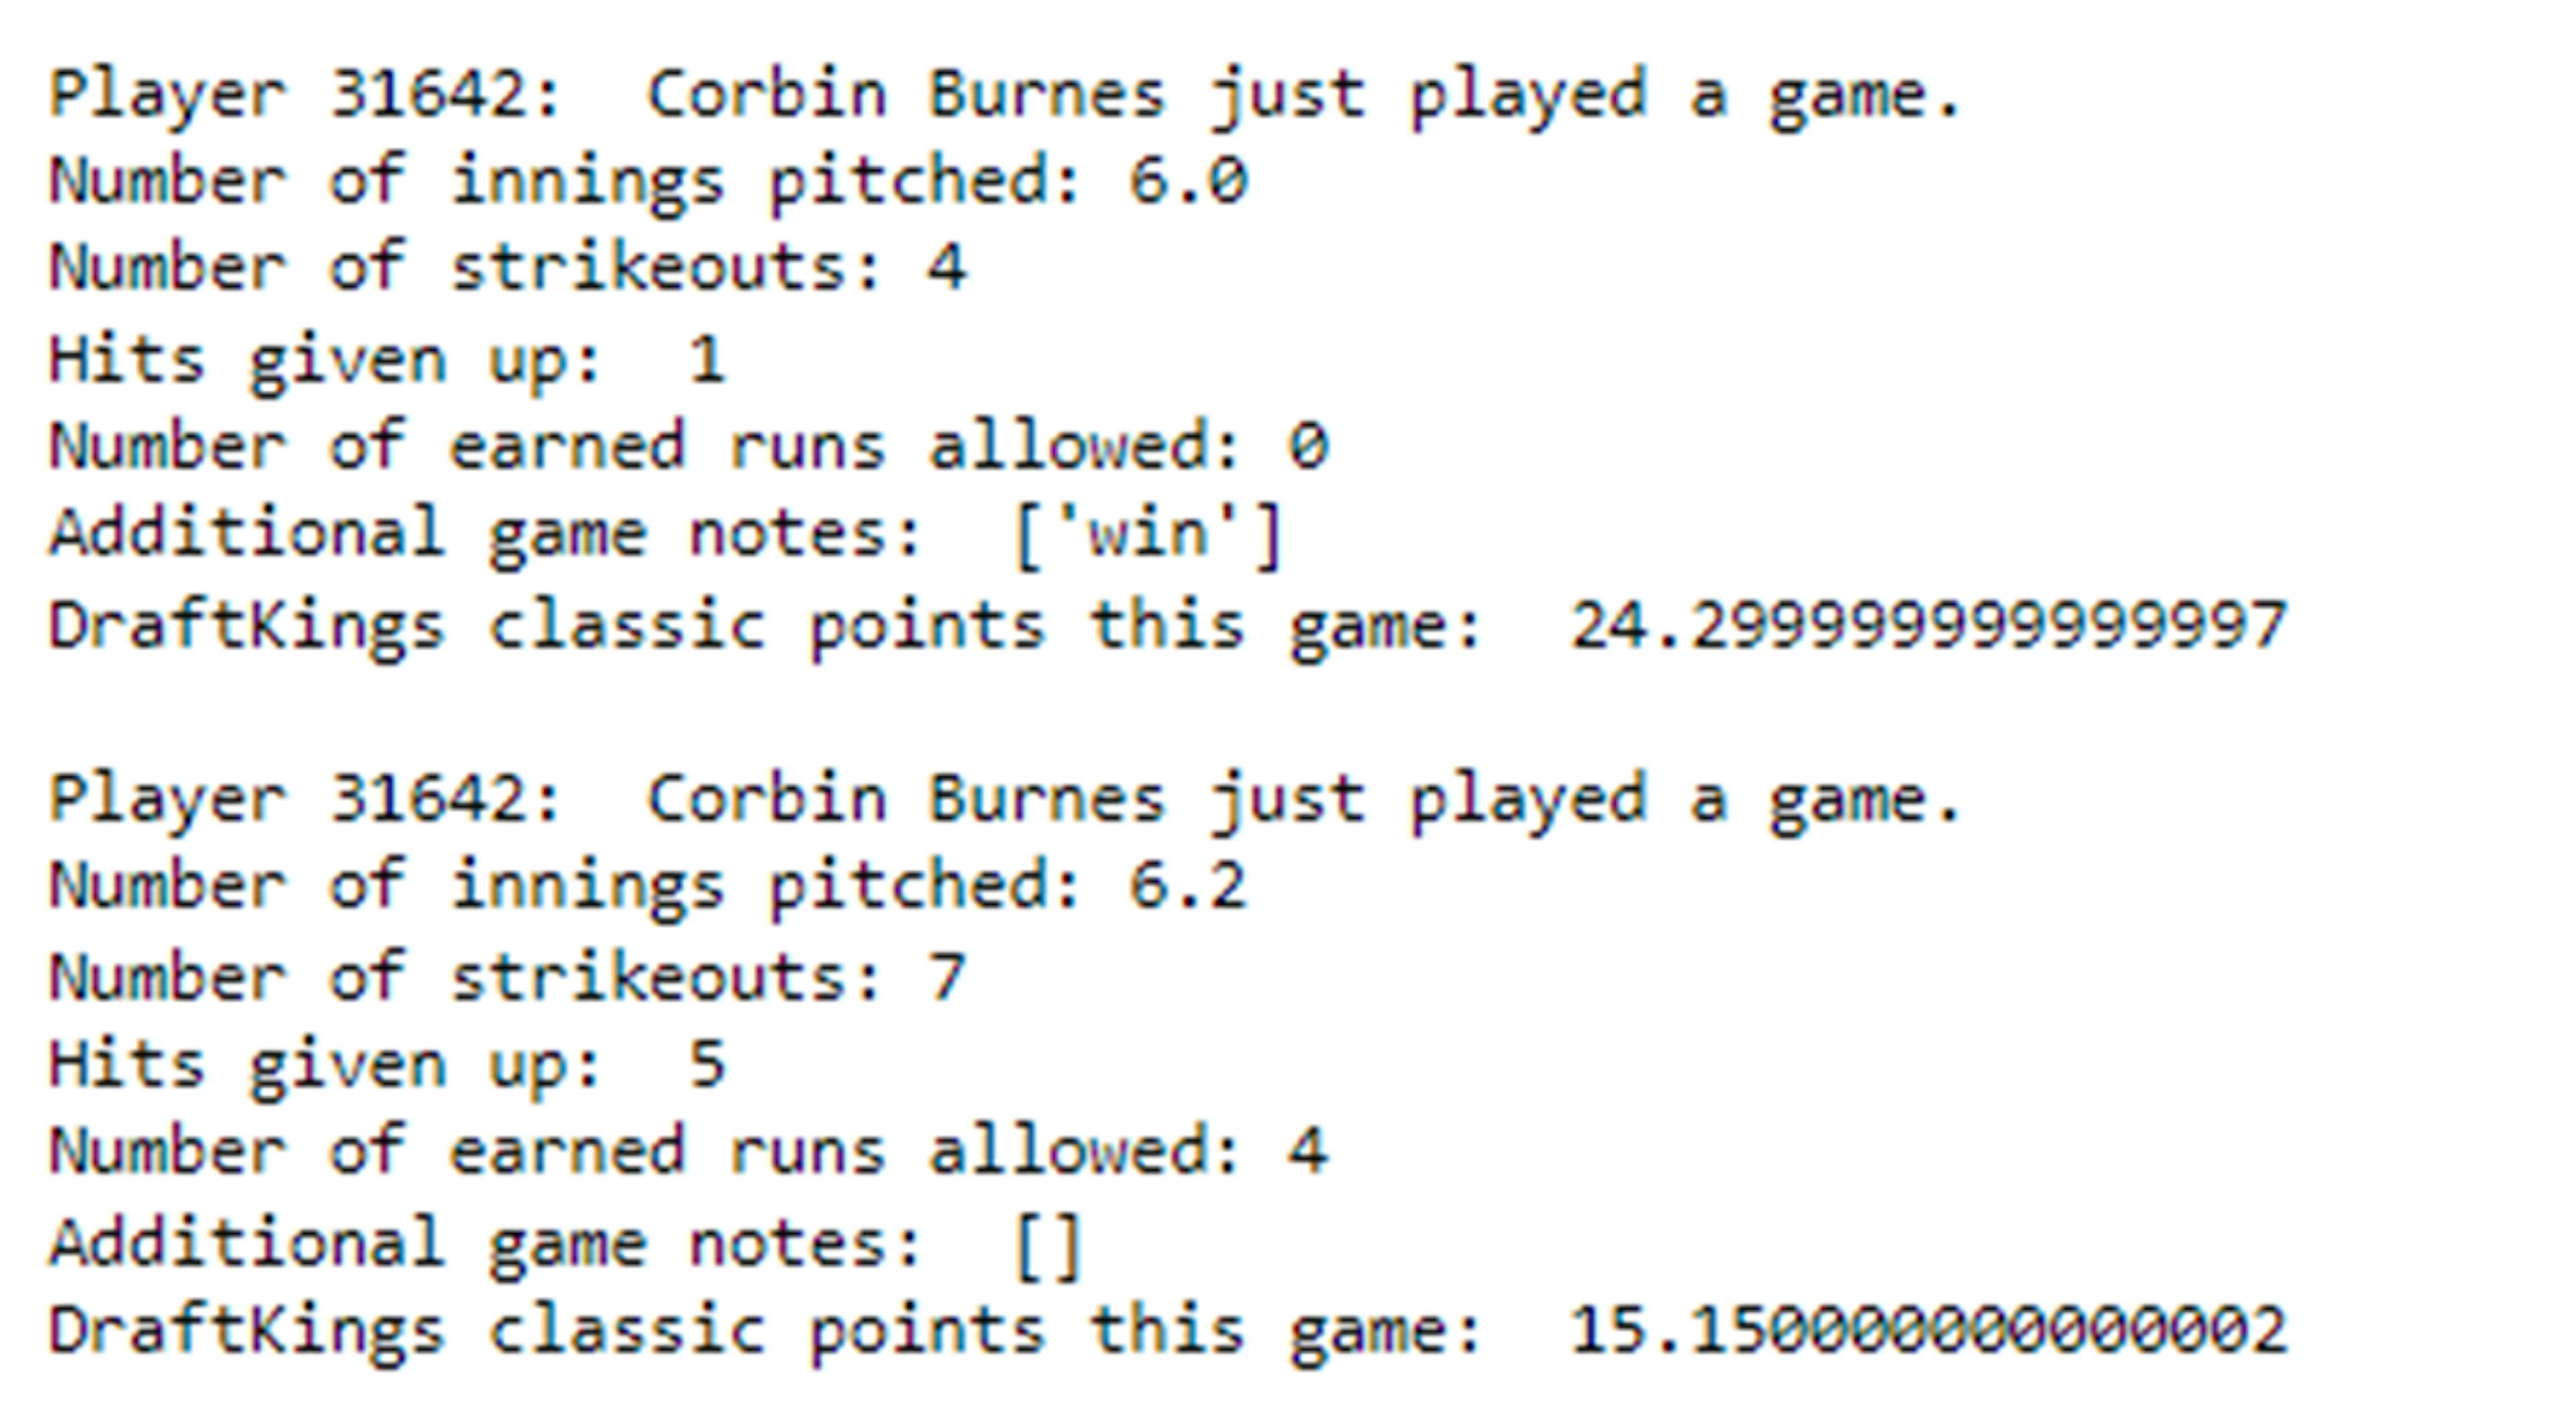 Image by Author: Corbin Burnes simulated pitching performances